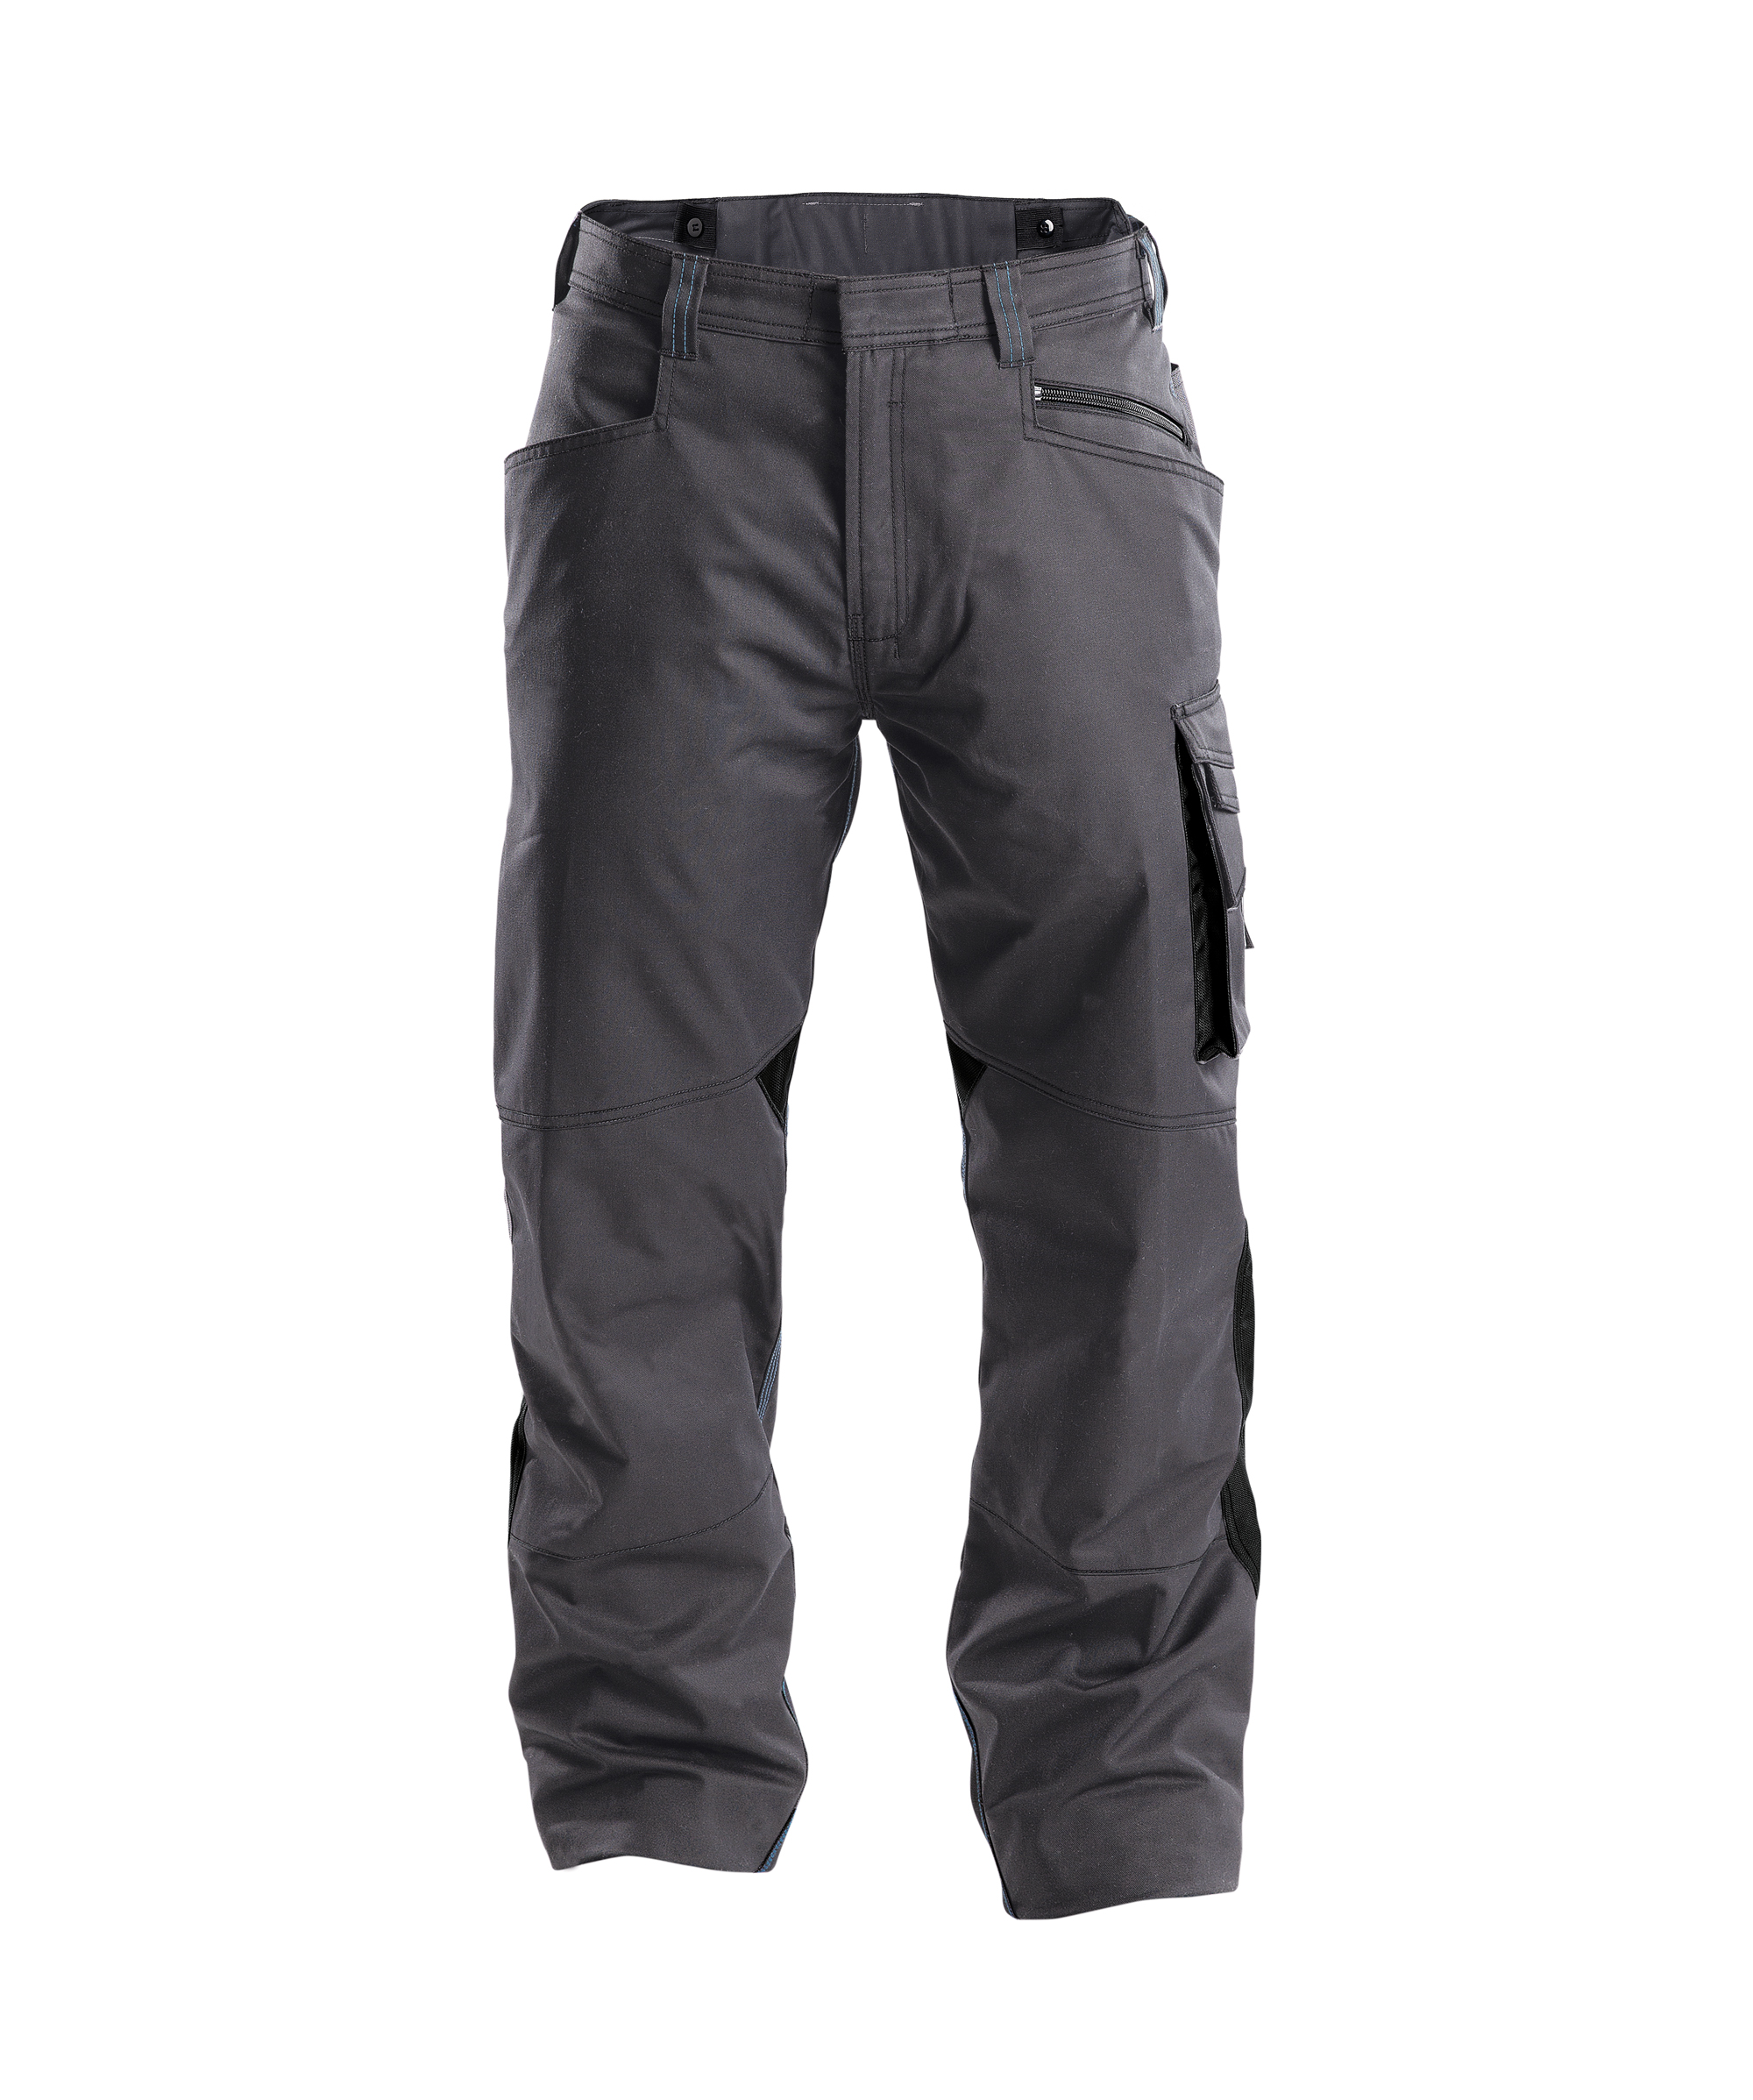 spectrum_two-tone-work-trousers_anthracite-grey-black_front.jpg